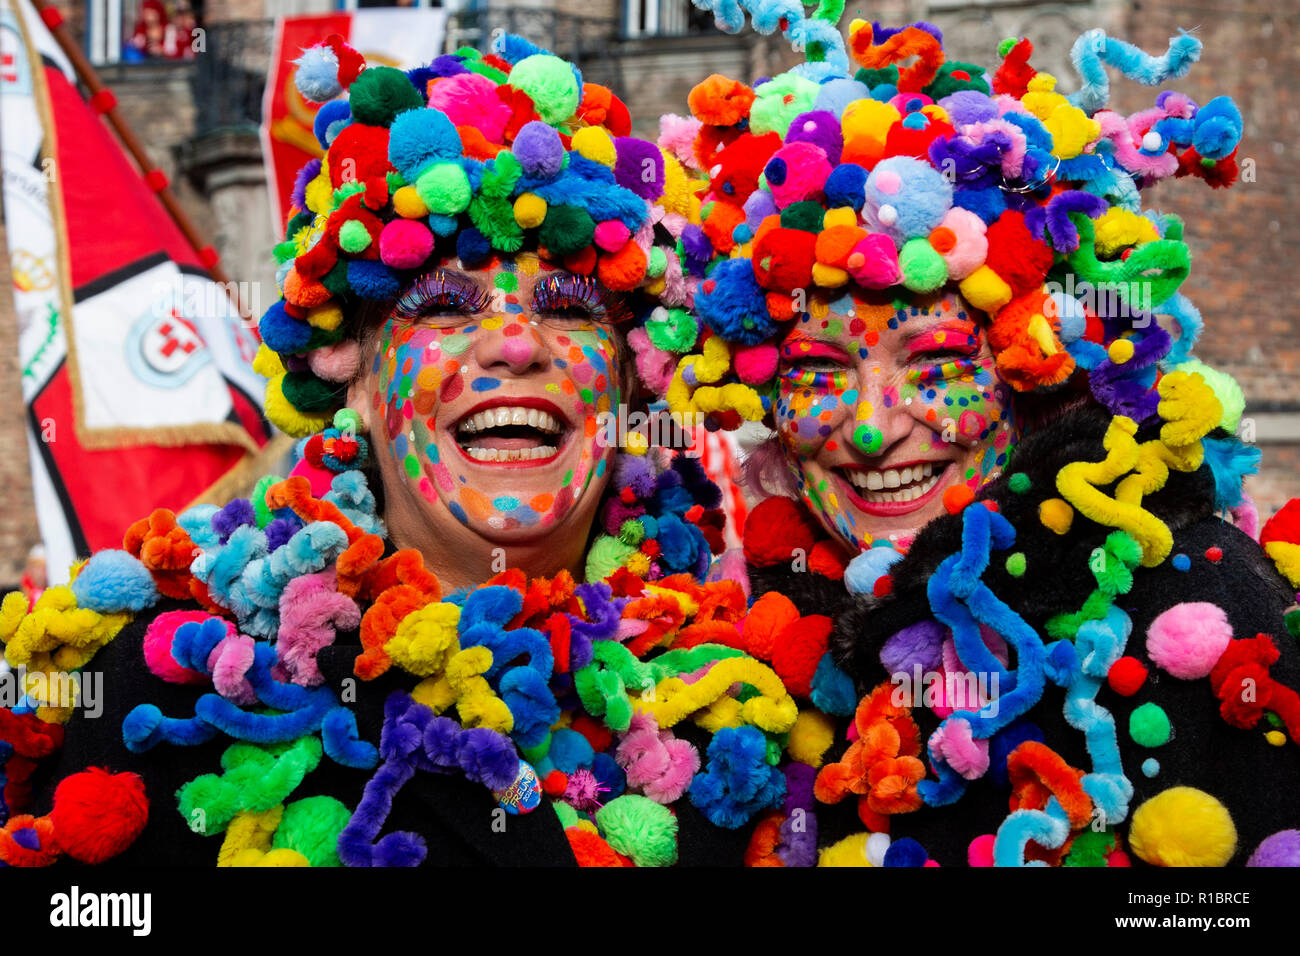 Düsseldorf, Germany. 11 November 2018. The most colourful costums on display. The German carnival season traditionally starts at 11 minutes past 11 o'clock on 11 November which today coincided with the centenary of Armistice Day, the end of World War I. Photo: 51North/Alamy Live News Stock Photo